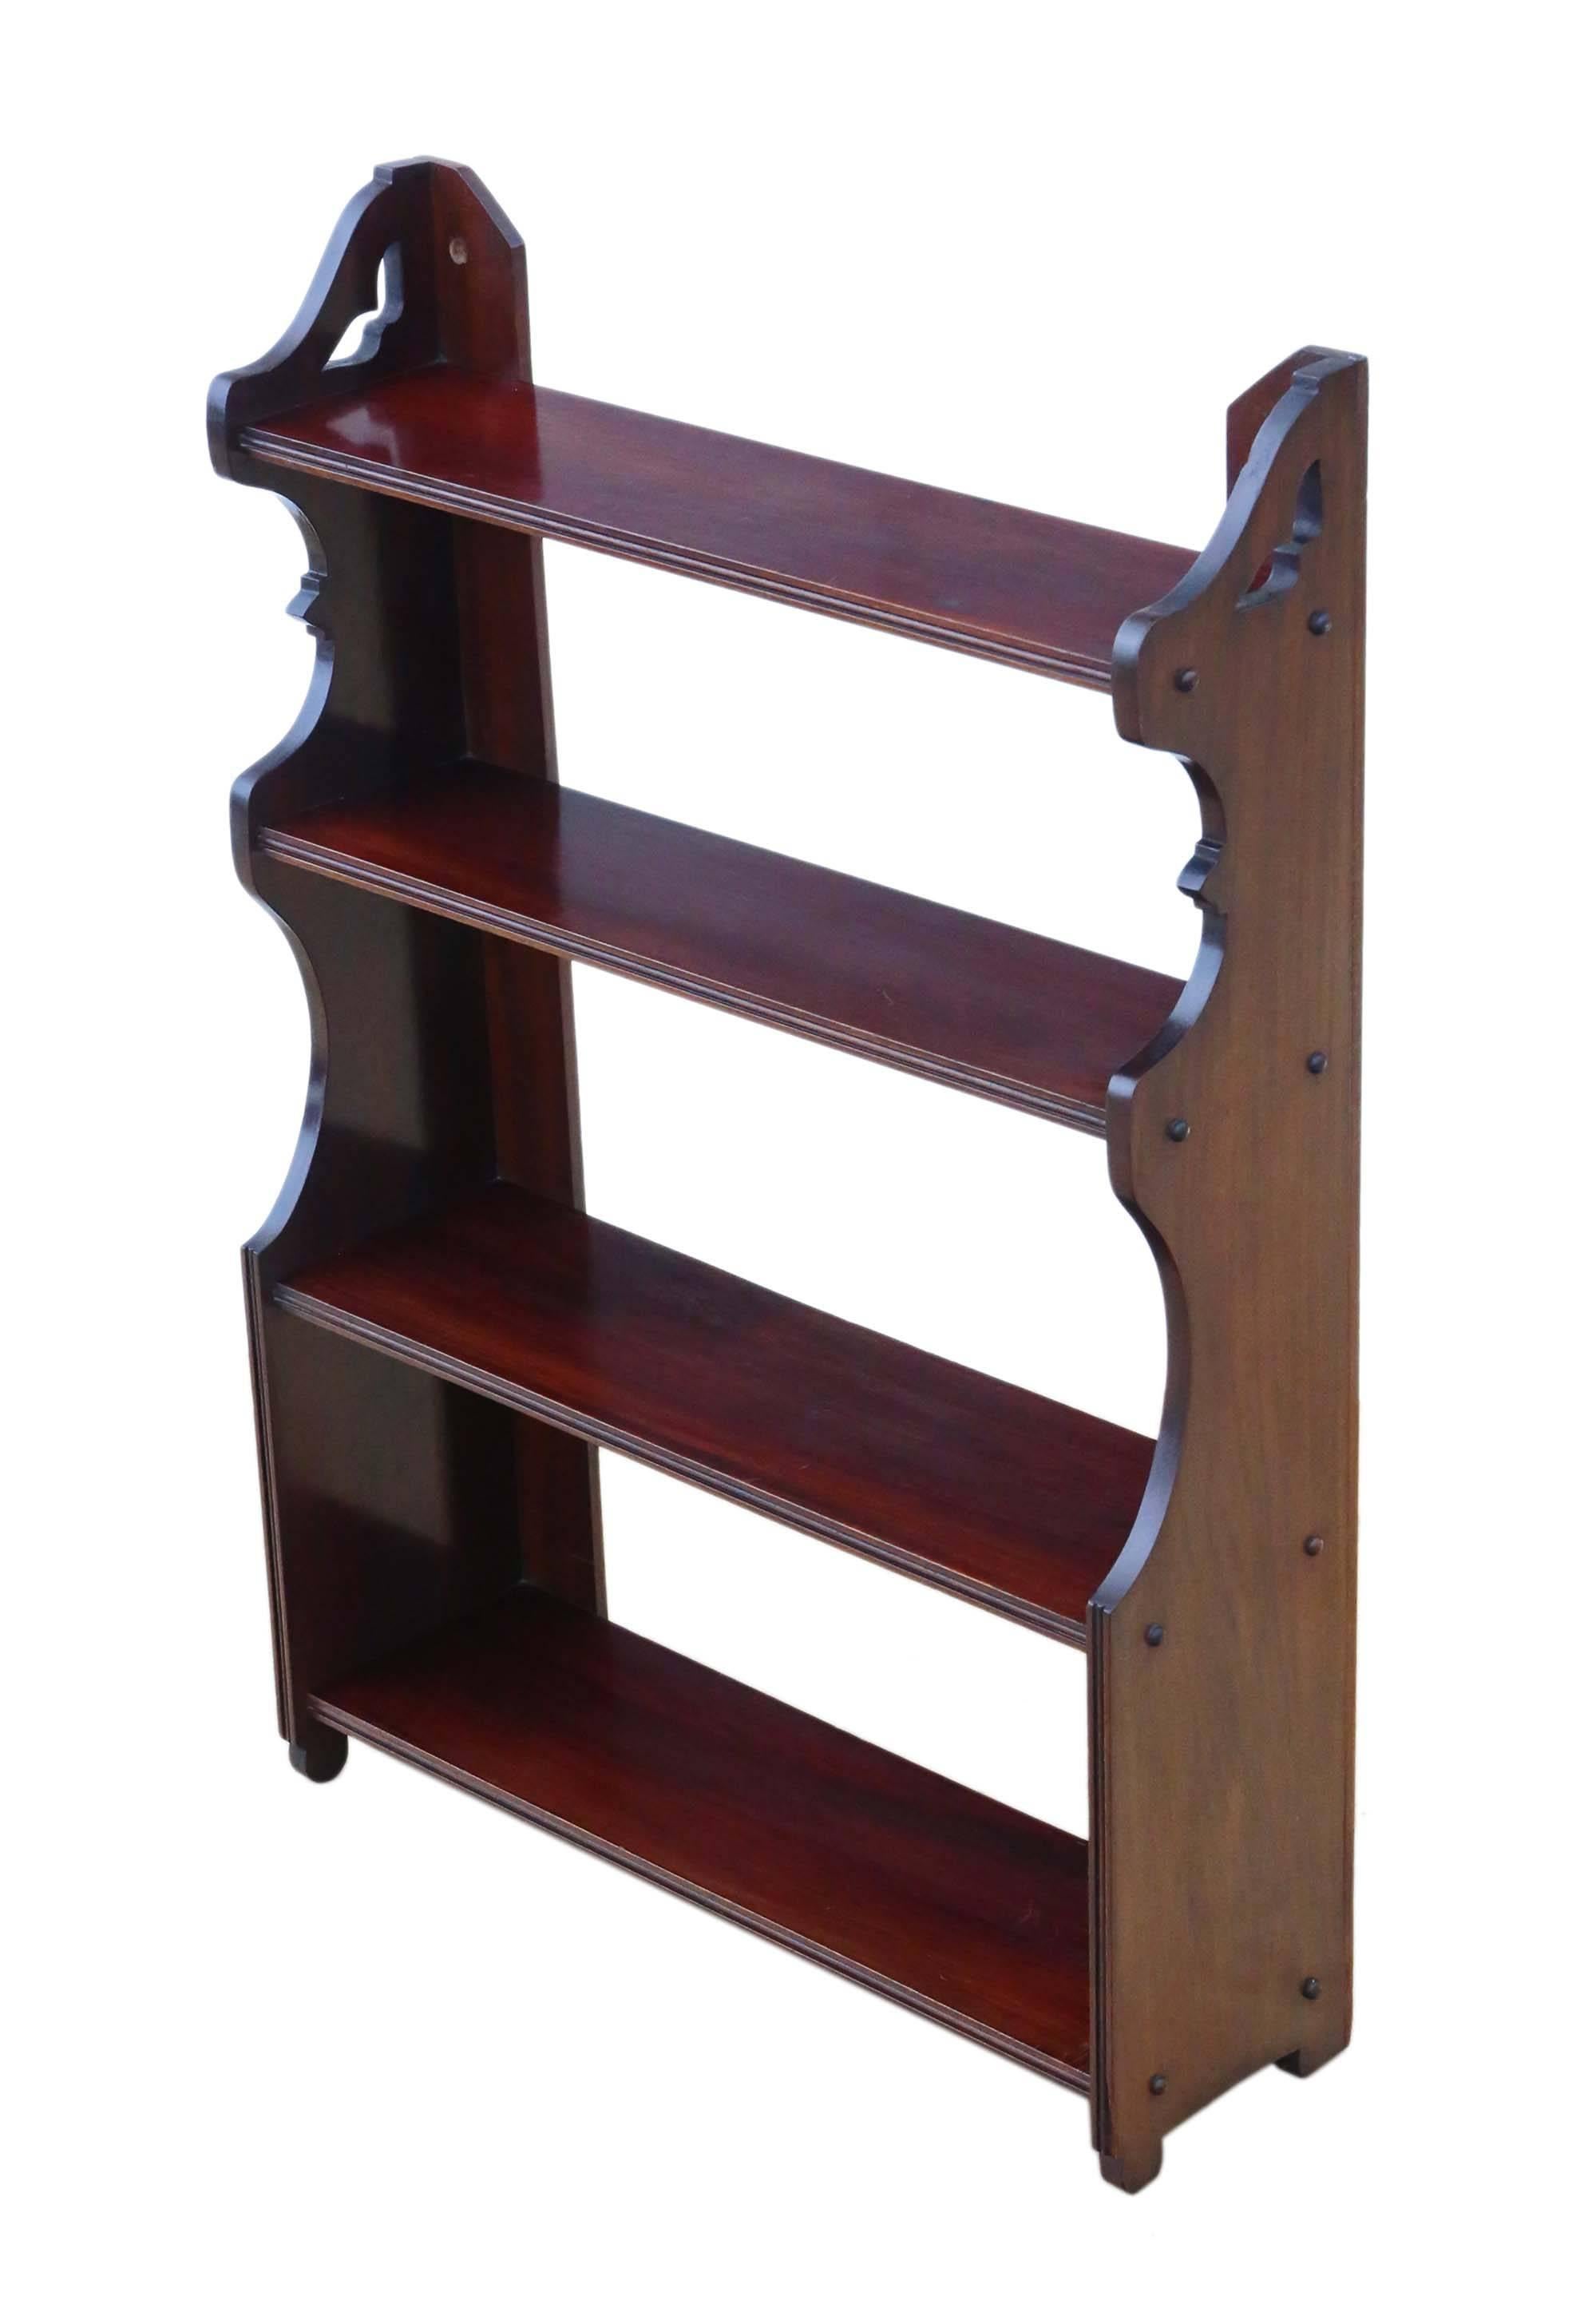 Antique quality late Victorian mahogany open bookcase, circa 1900.

Solid and strong, with no loose joints. Has been both floor and wall-mounted.

Would look great in the right location! No woodworm. A good quality piece.

Overall maximum